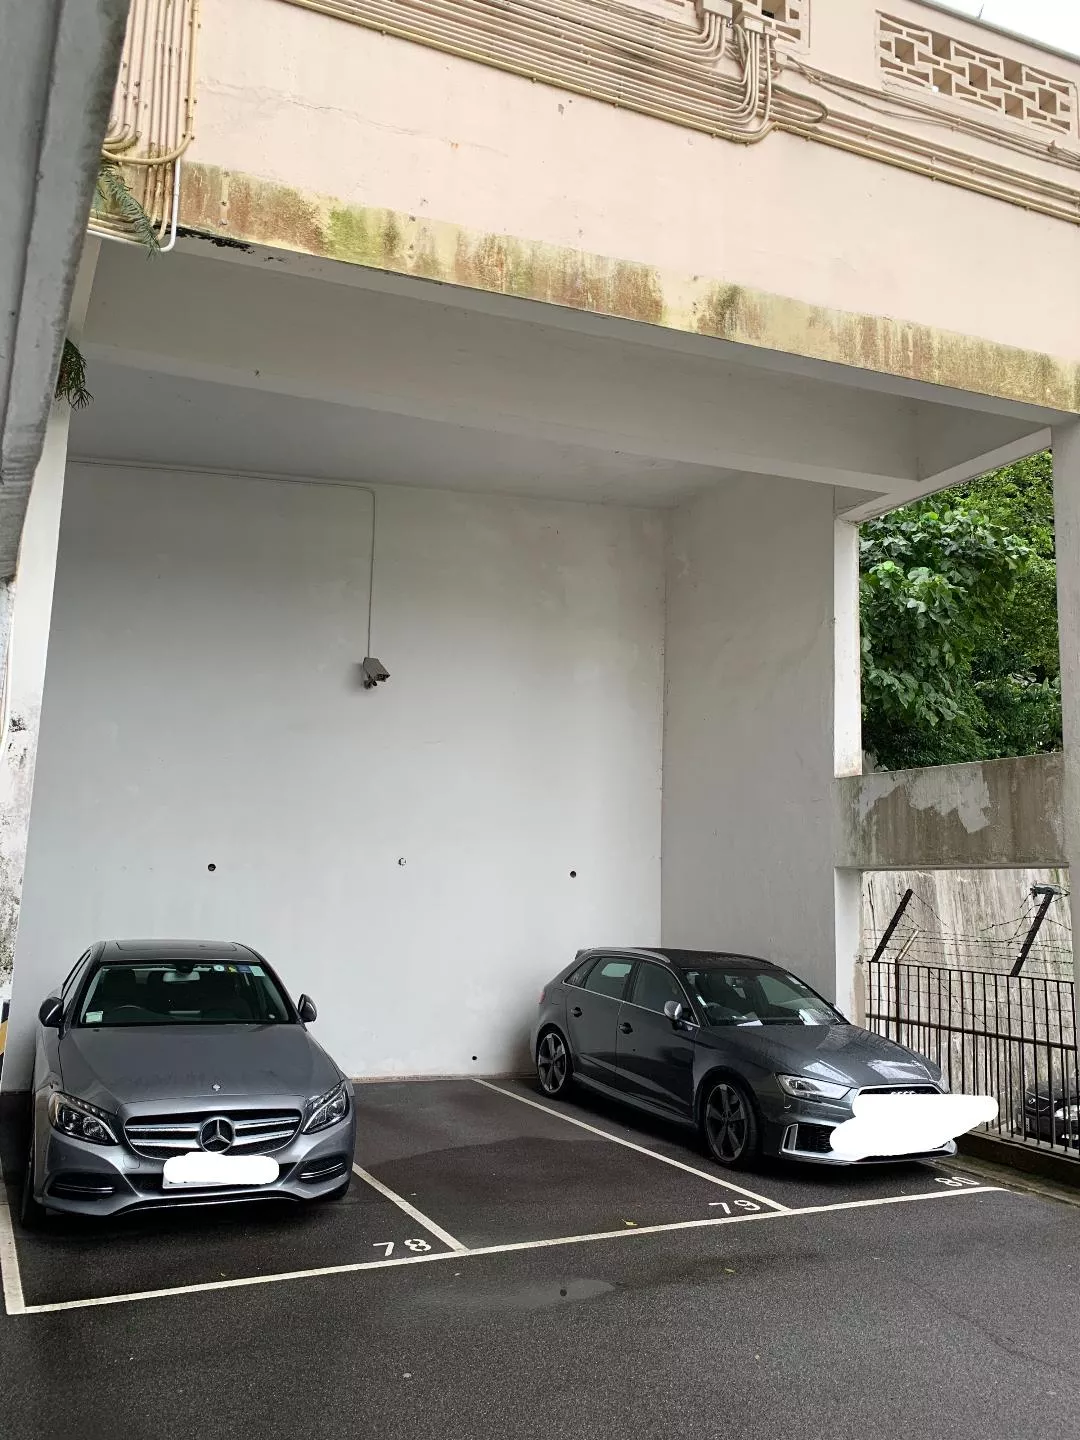 Parking, Garages And Car Spaces For Rent - Covered Parking Space For Rent